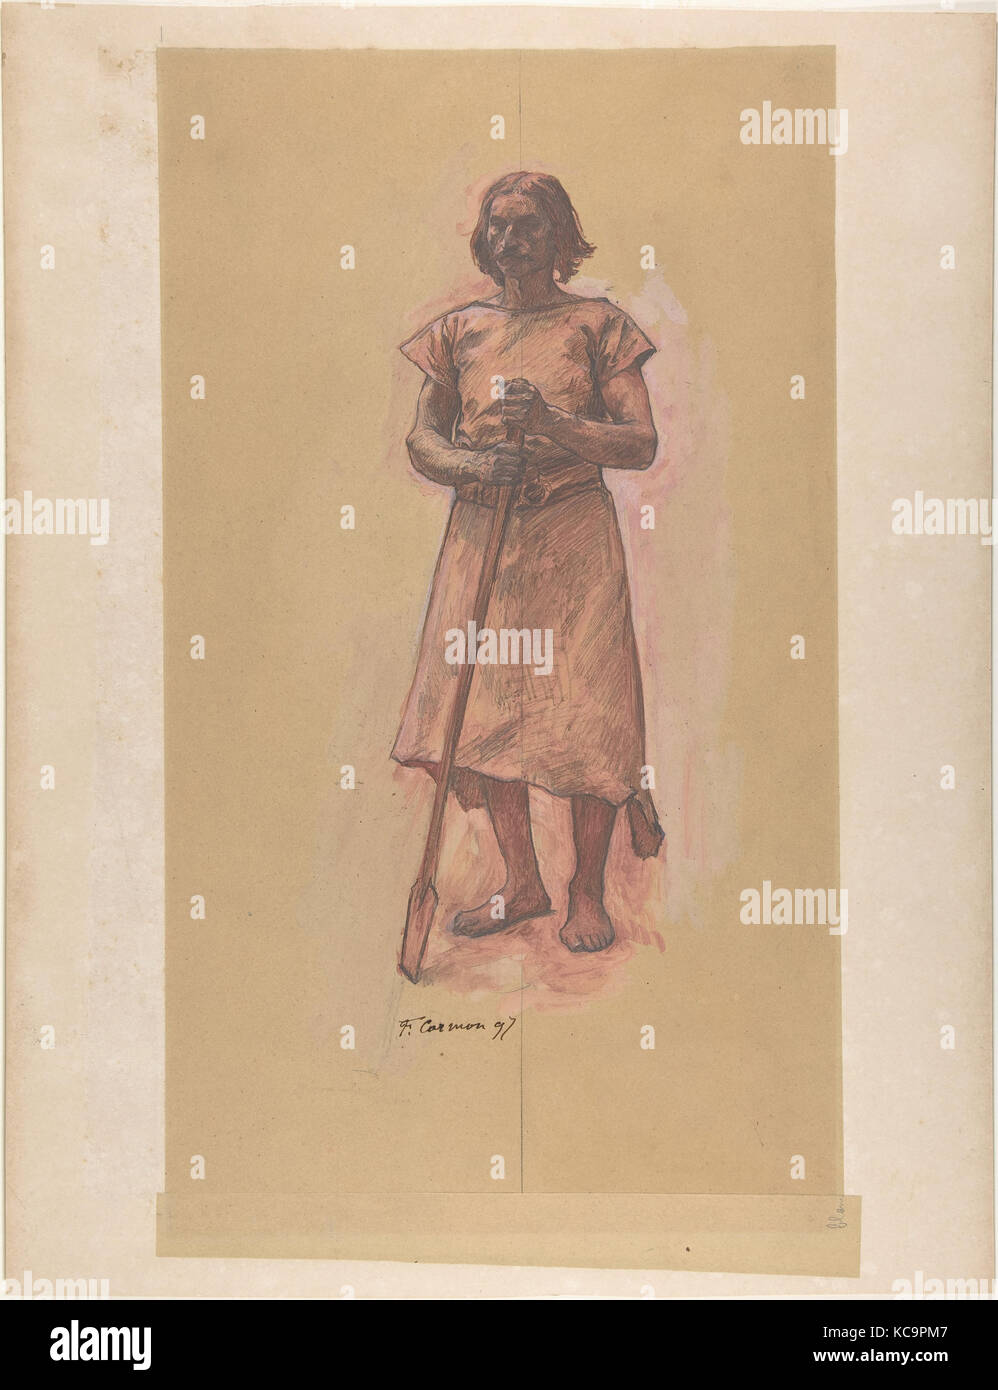 Standing Man, 1897, Graphite over red and white oil paint, Sheet: 18 1/2 x 10 5/16 in. (47 x 26.2cm), Drawings, Fernand Cormon Stock Photo